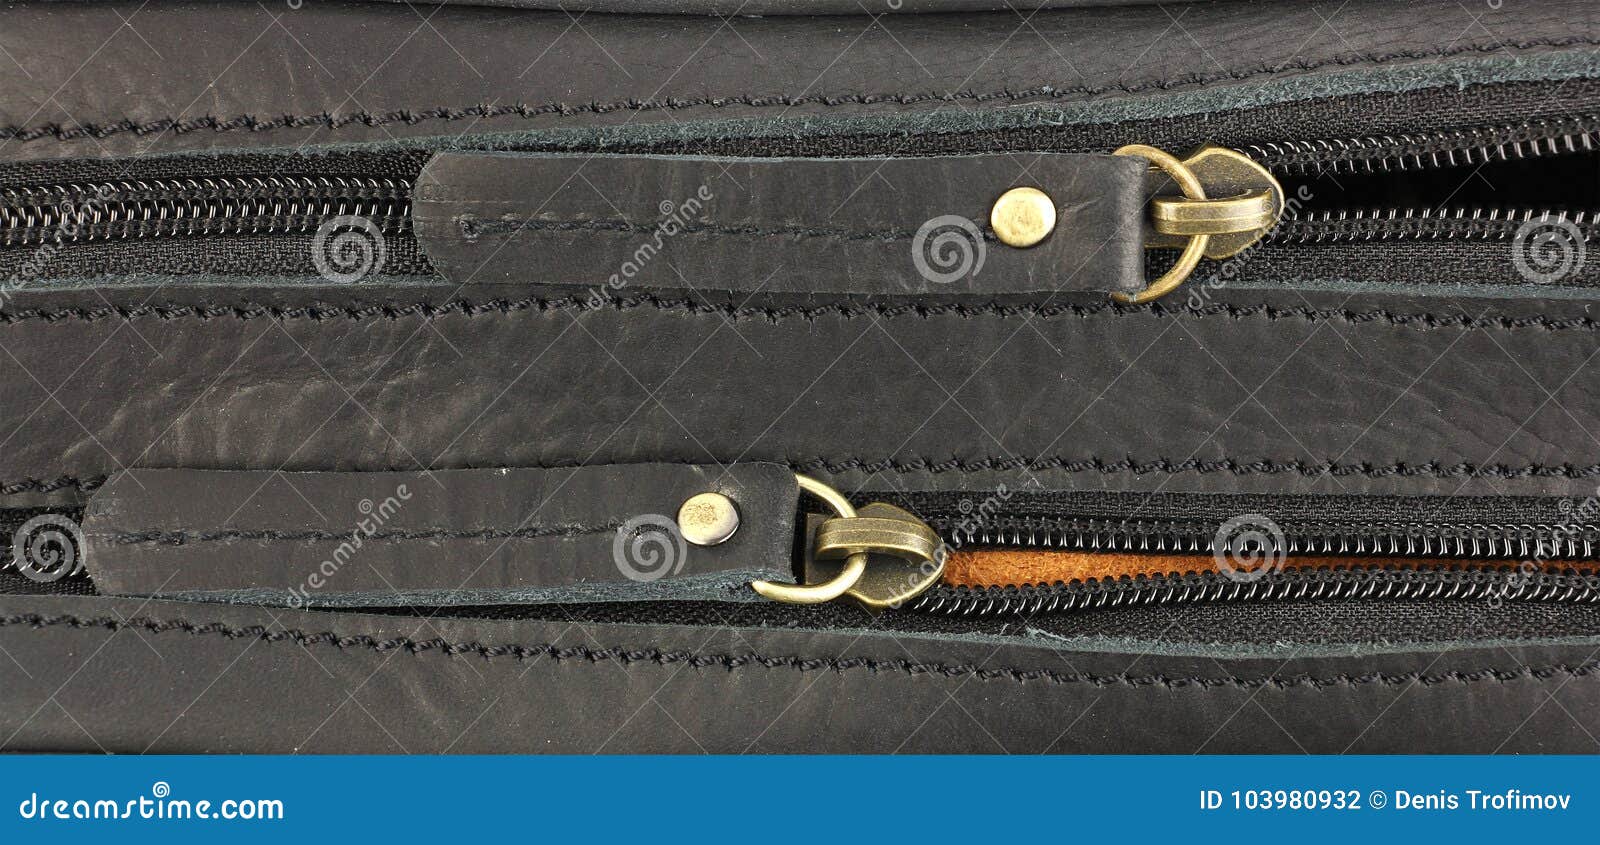 Pair of Zippers on the Black Leather Bag, One Behind Stock Photo ...